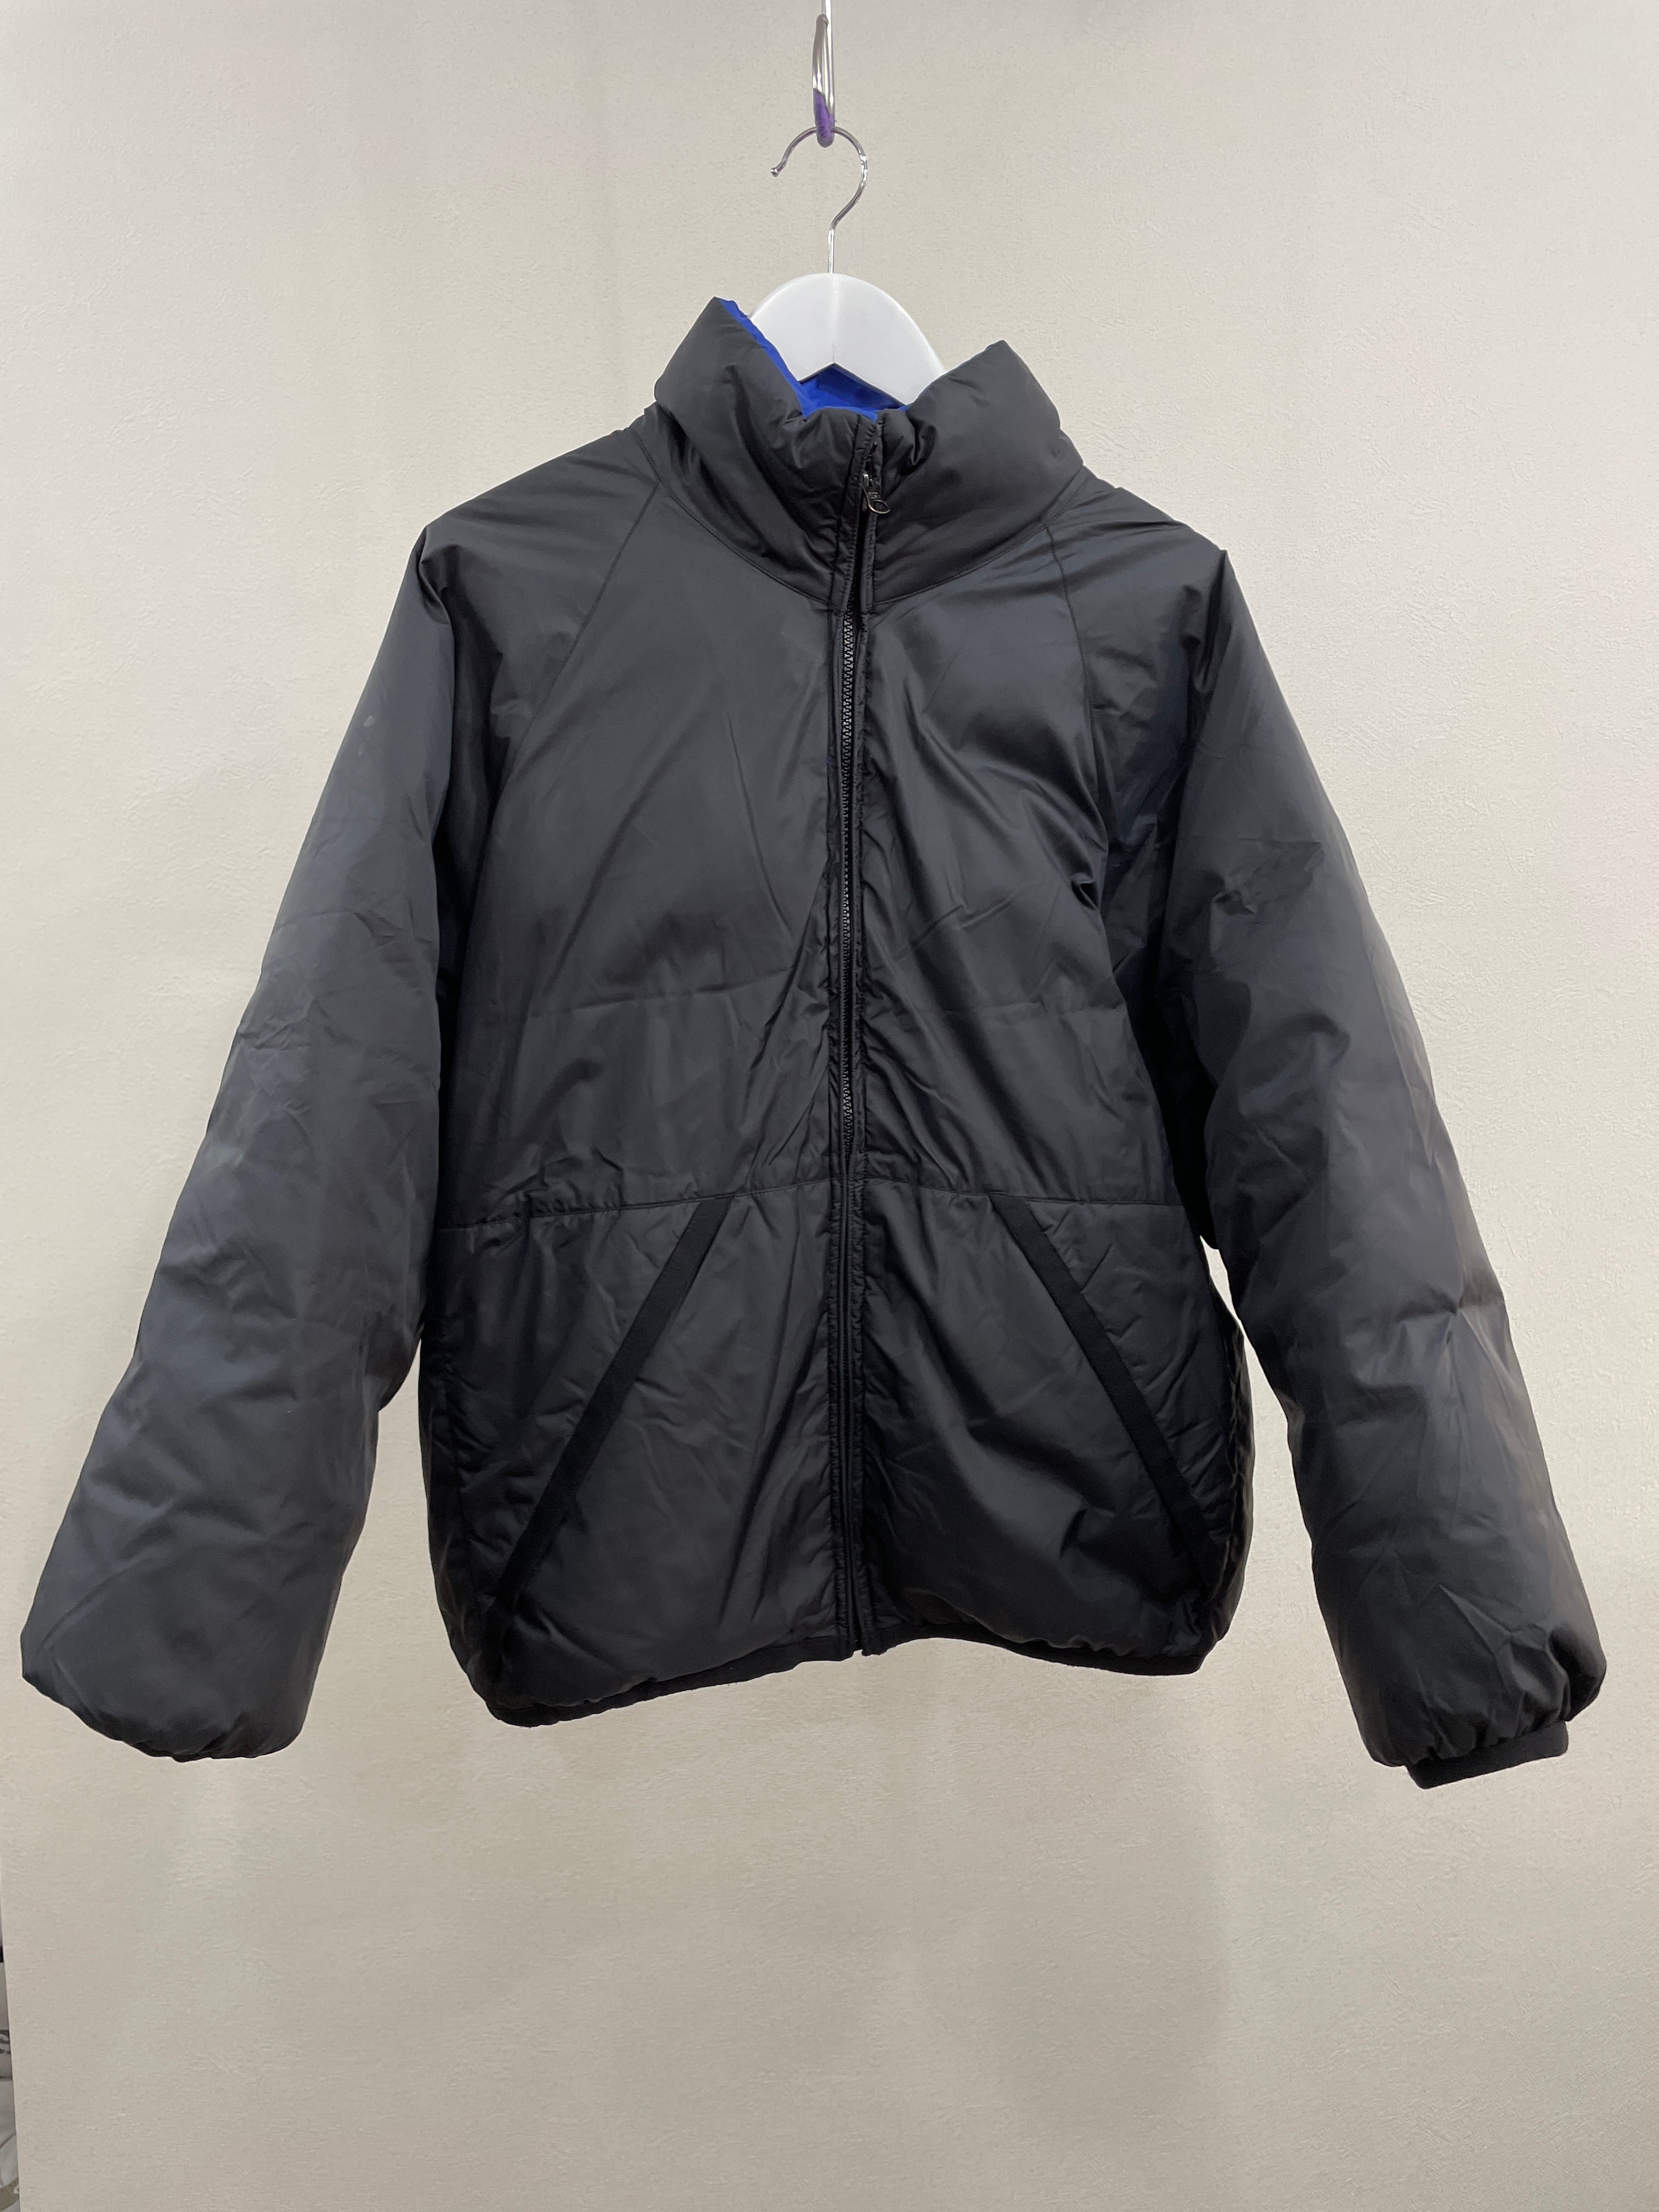 NAUTICA Reversible Down Jacket | FANCLUB powered by BASE